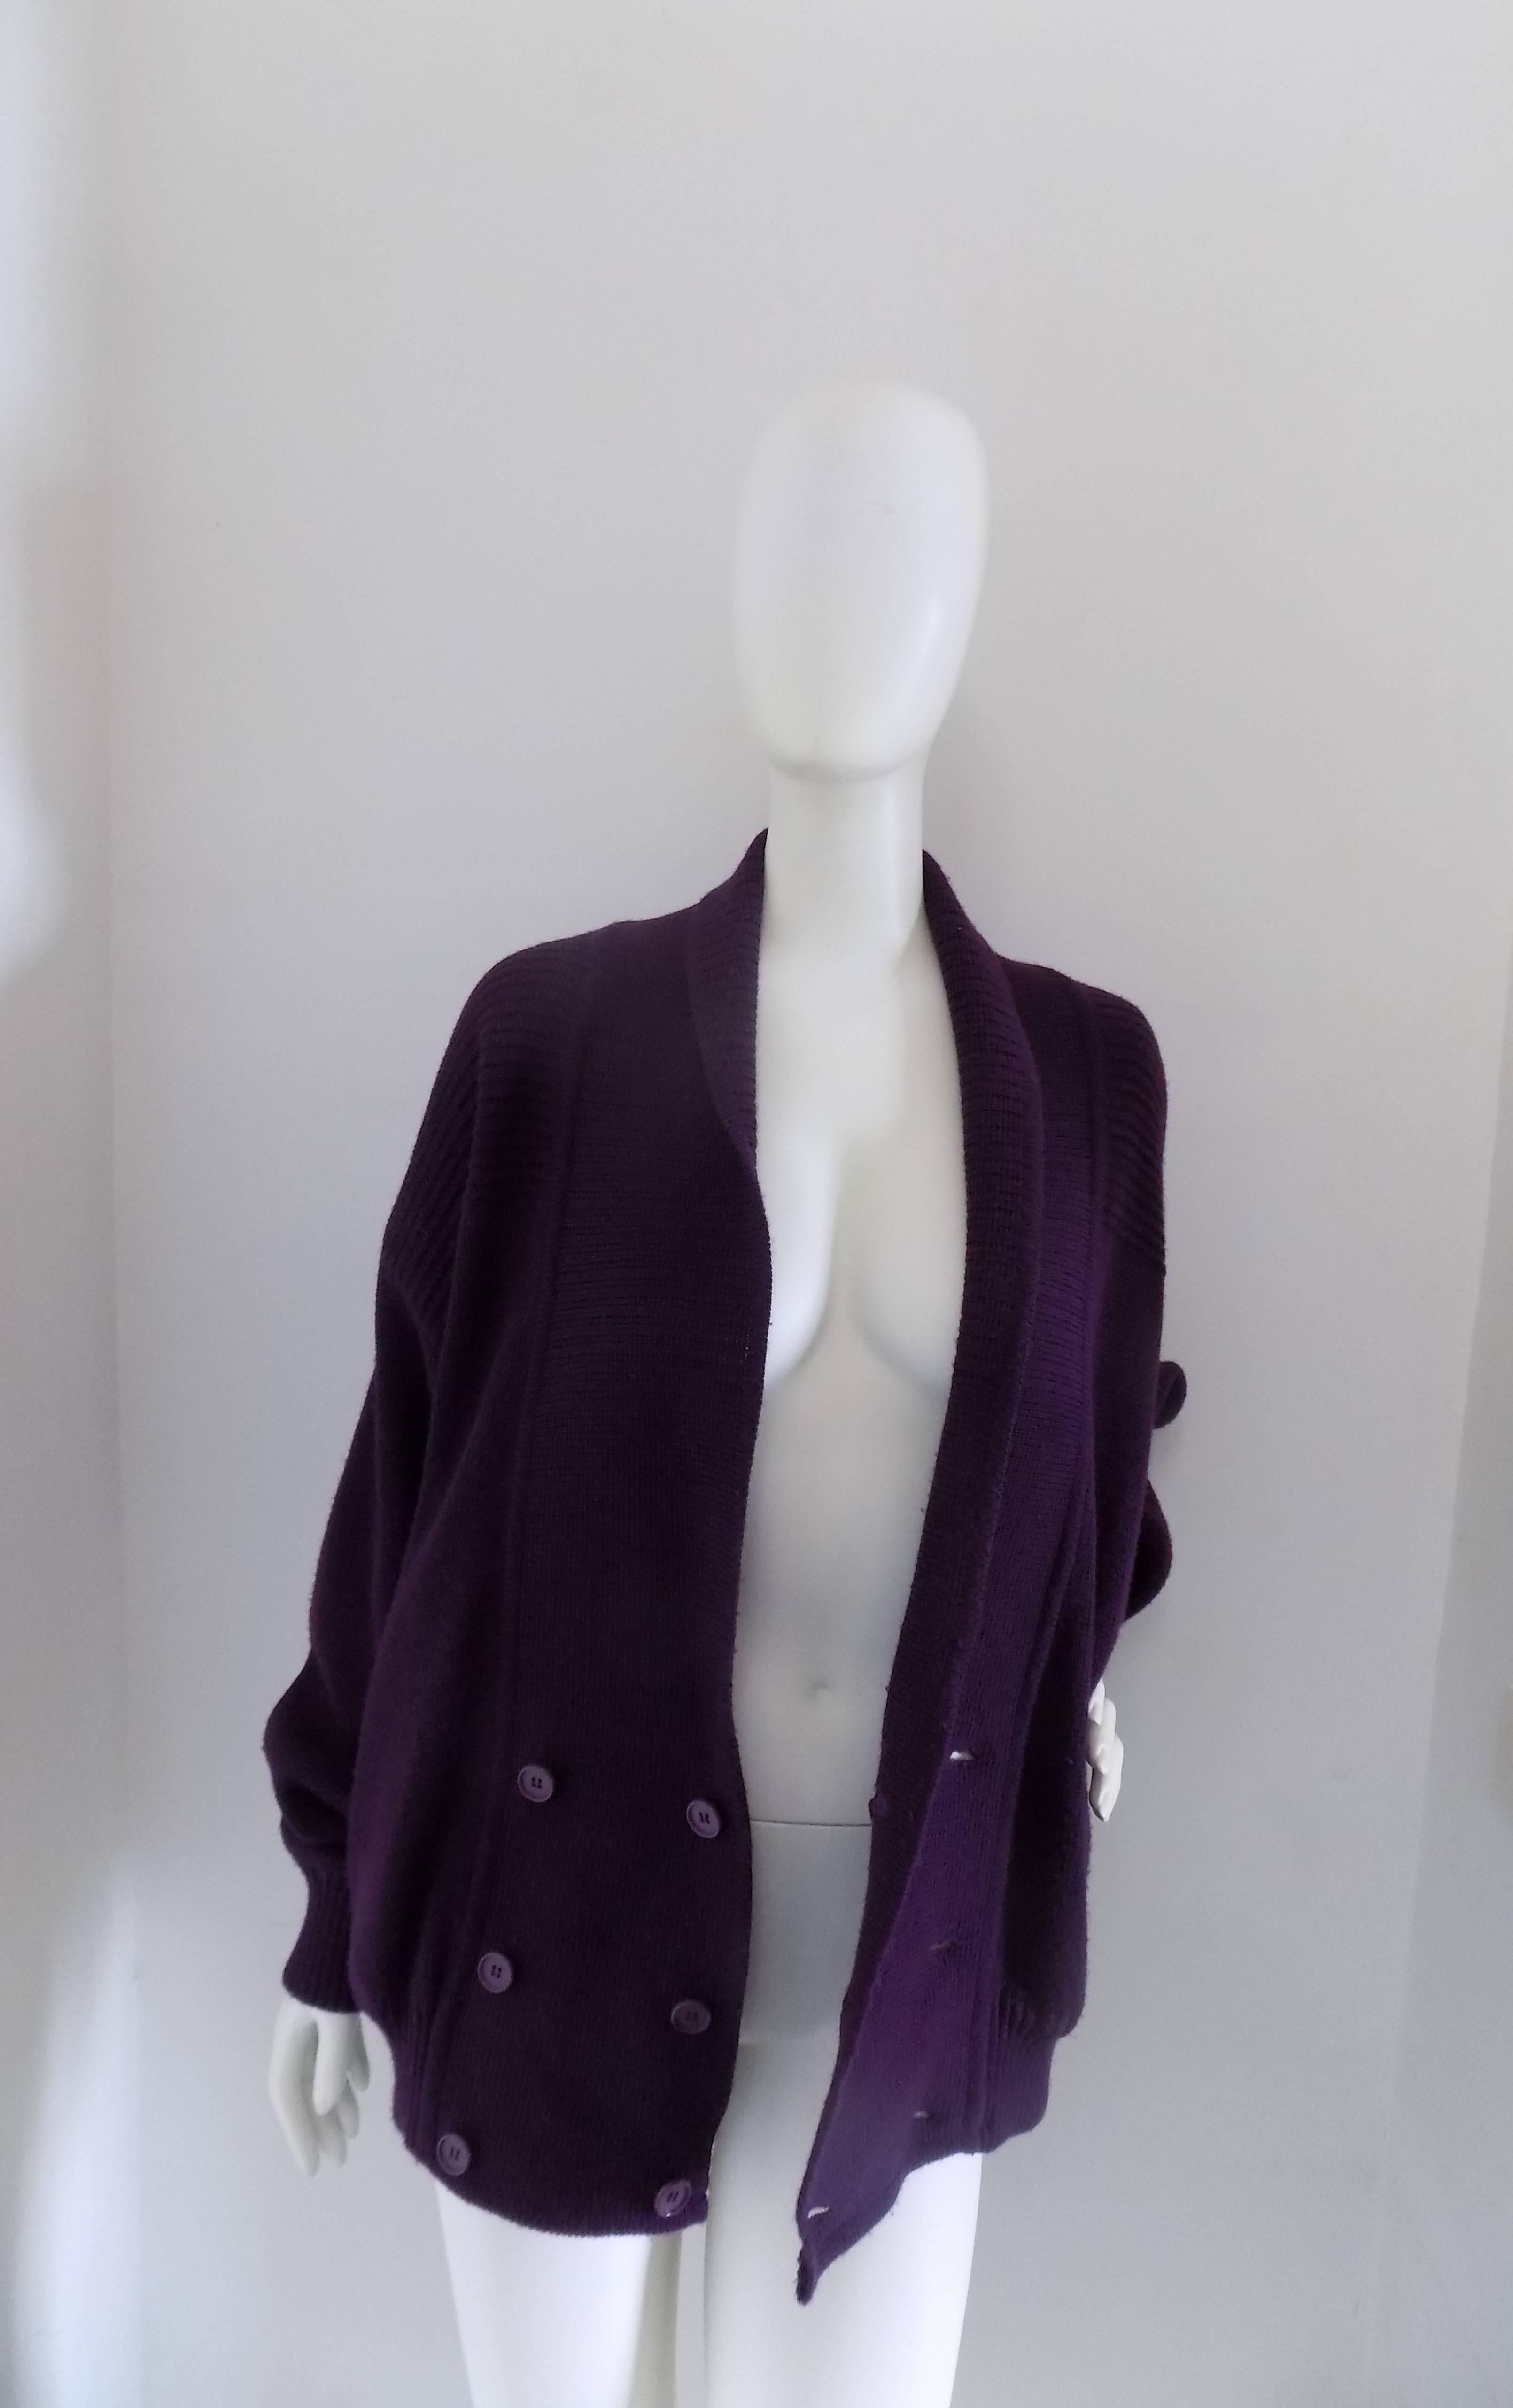 Yves Saint Laurent Purple Cardigan
Totally made in italy in size 48/50
